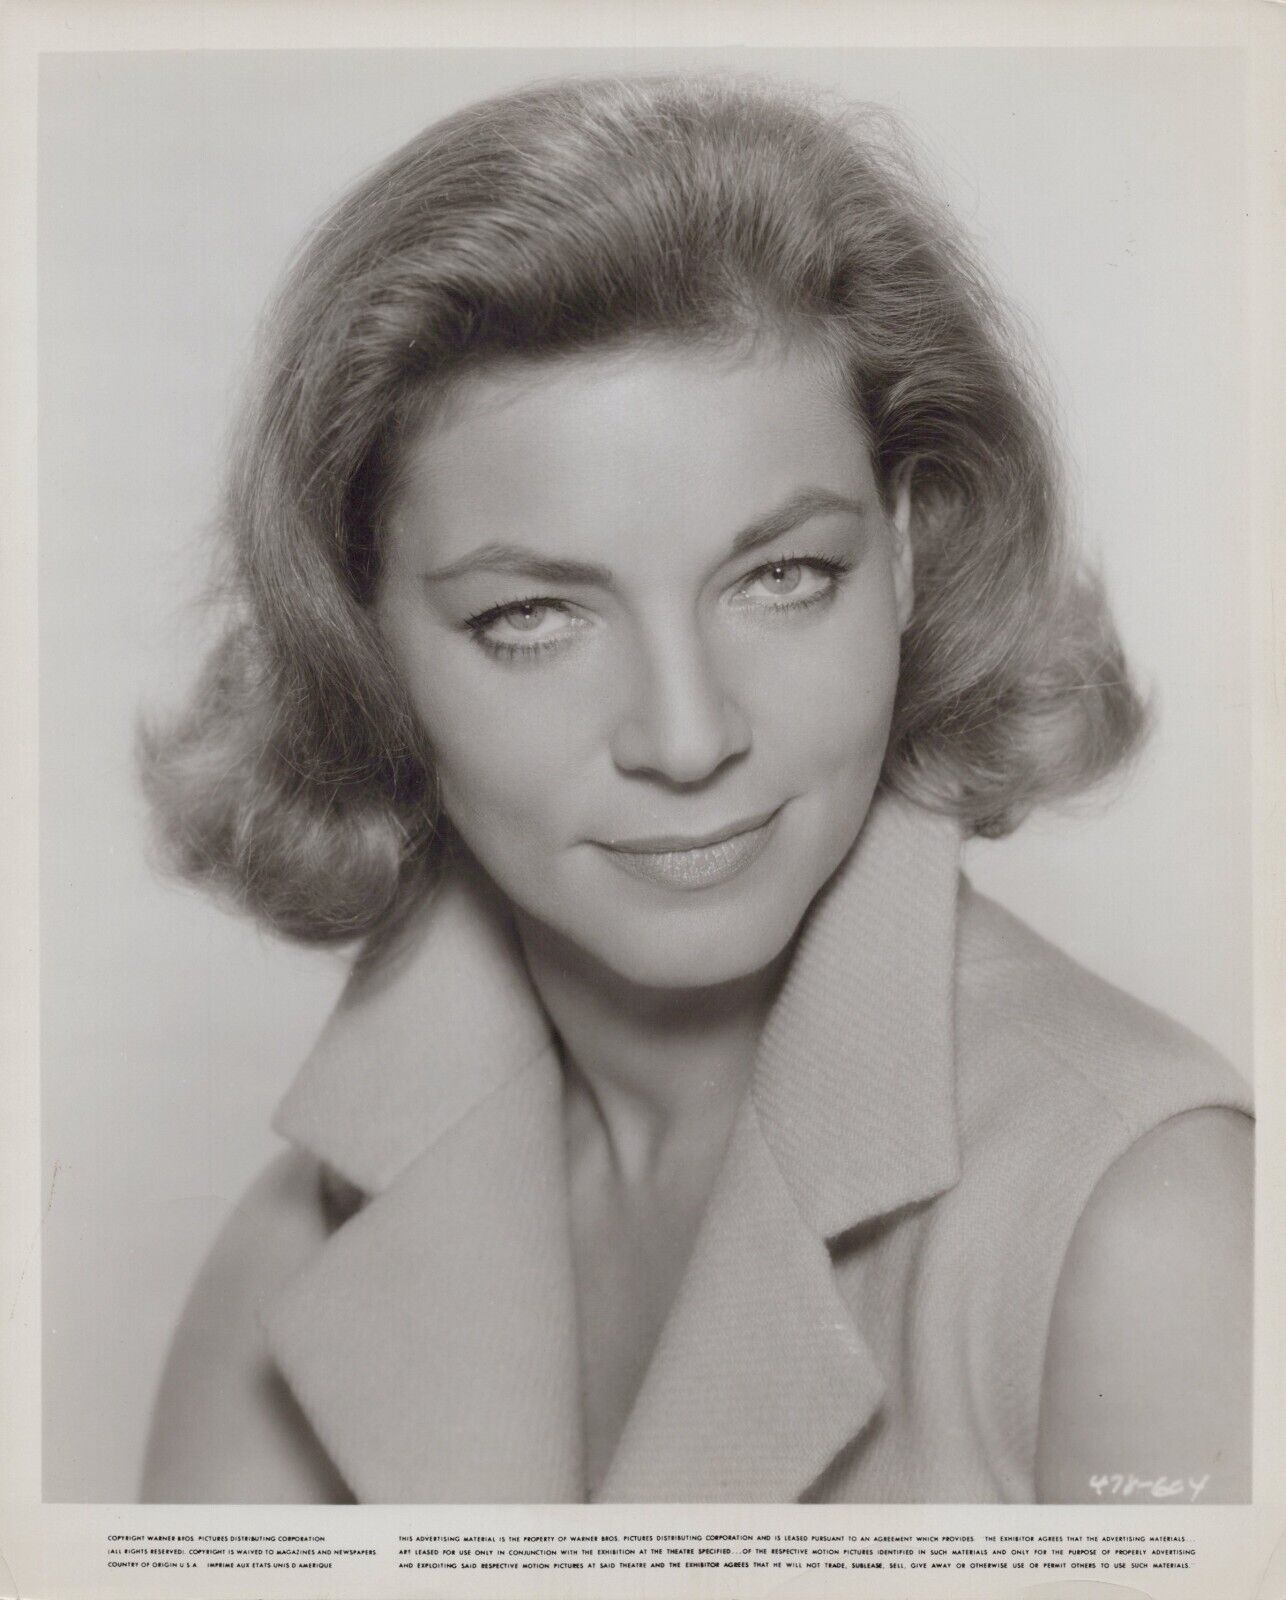 HOLLYWOOD BEAUTY LAUREN BACALL CLOSE-UP STUNNING PORTRAIT 1950s ORIG Photo C34